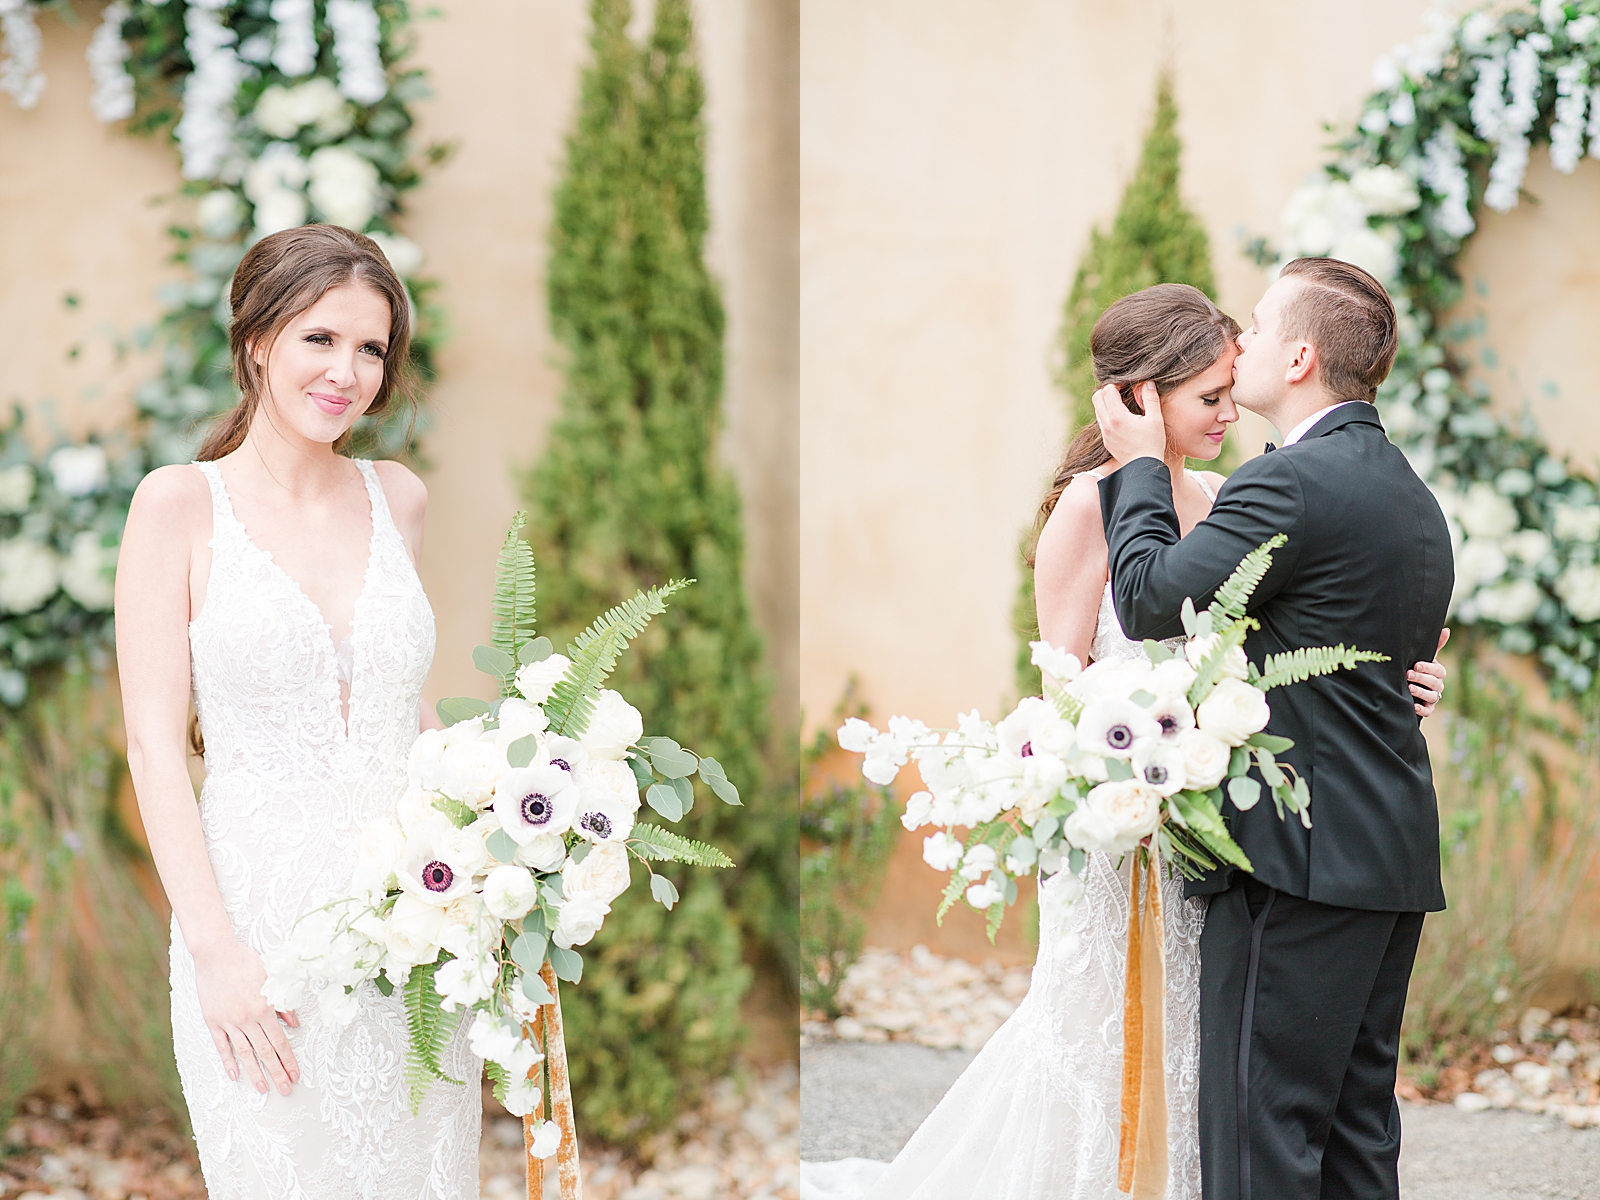 Montaluce Winery Wedding Ceremony Bride Smiling holding Bouquet and Groom Kissing Bride on Forehead Photos